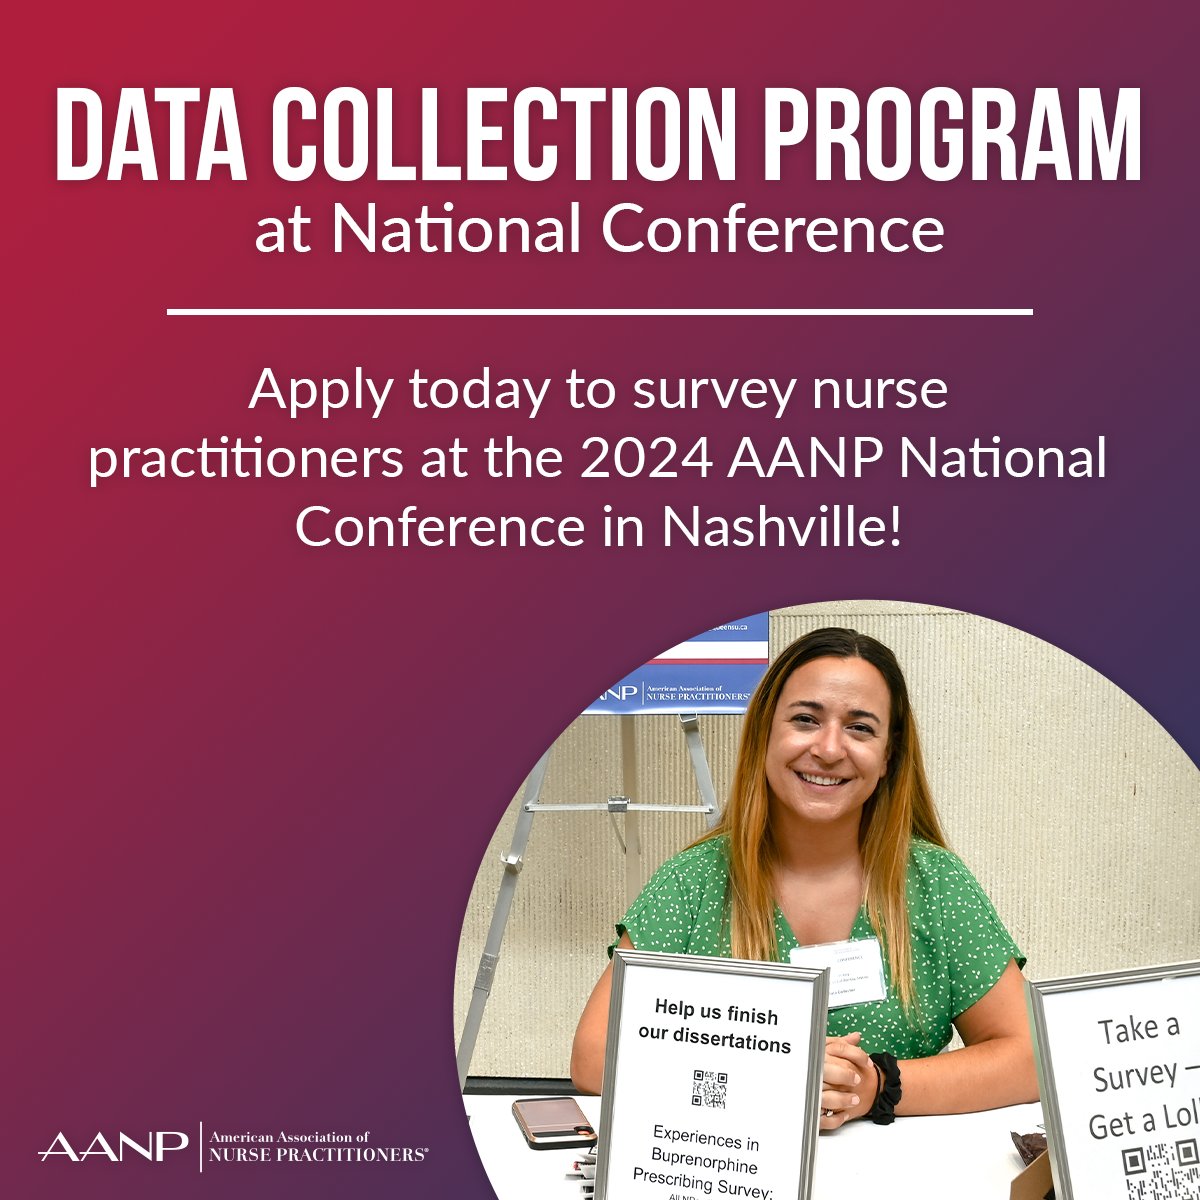 Don't miss this opportunity to recruit NPs into your study at the 2024 AANP National Conference! The deadline to submit your application for the Data Collection Program is April 15. Space is limited. Apply now at aanp.org/datacollection. #NPsLead